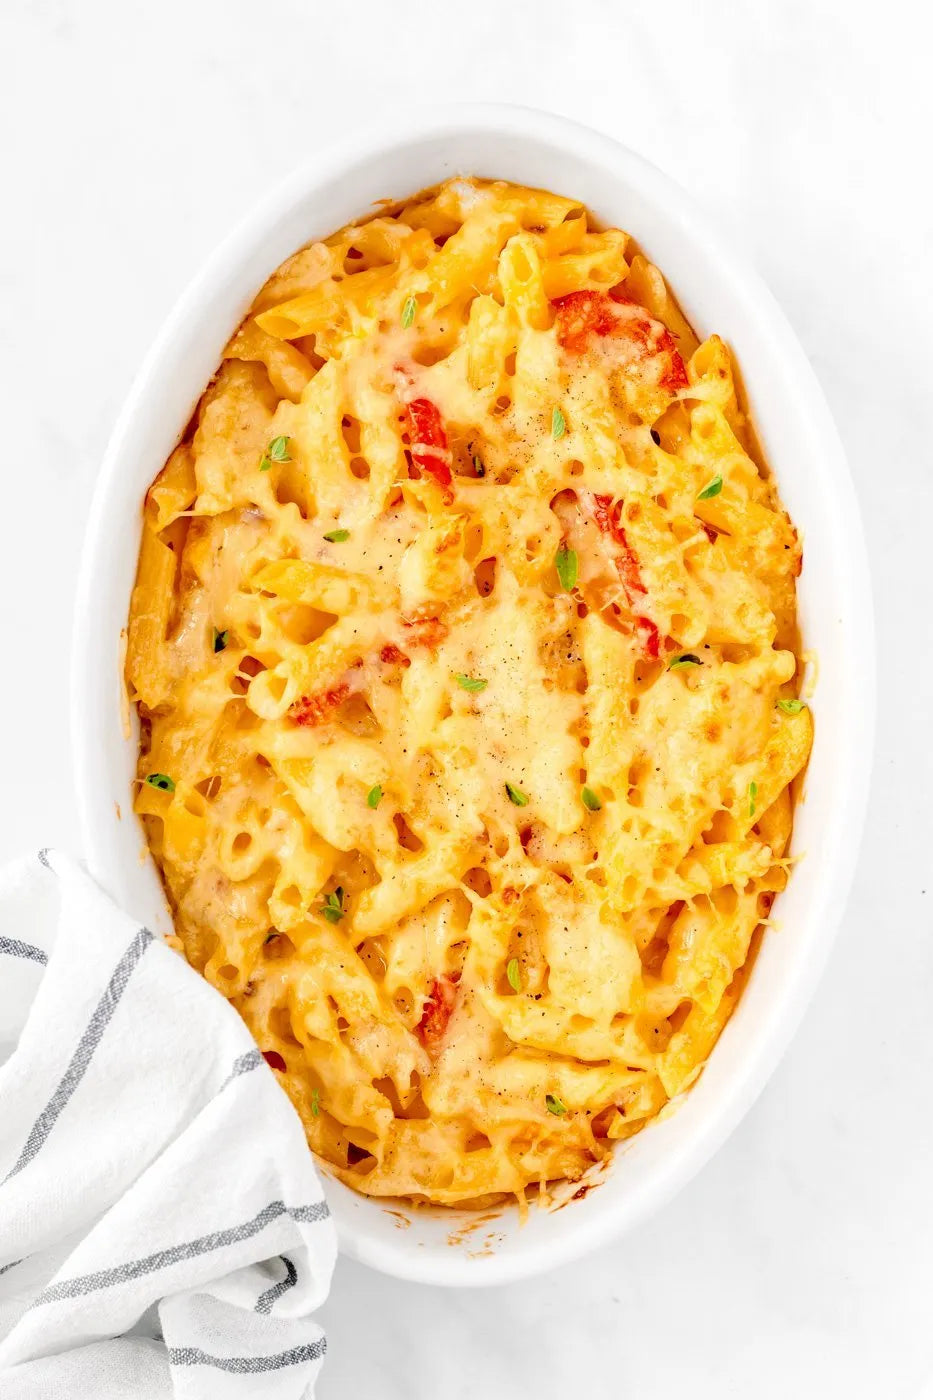 Haitian Mac and Cheese: A Comforting Casserole with a Twist